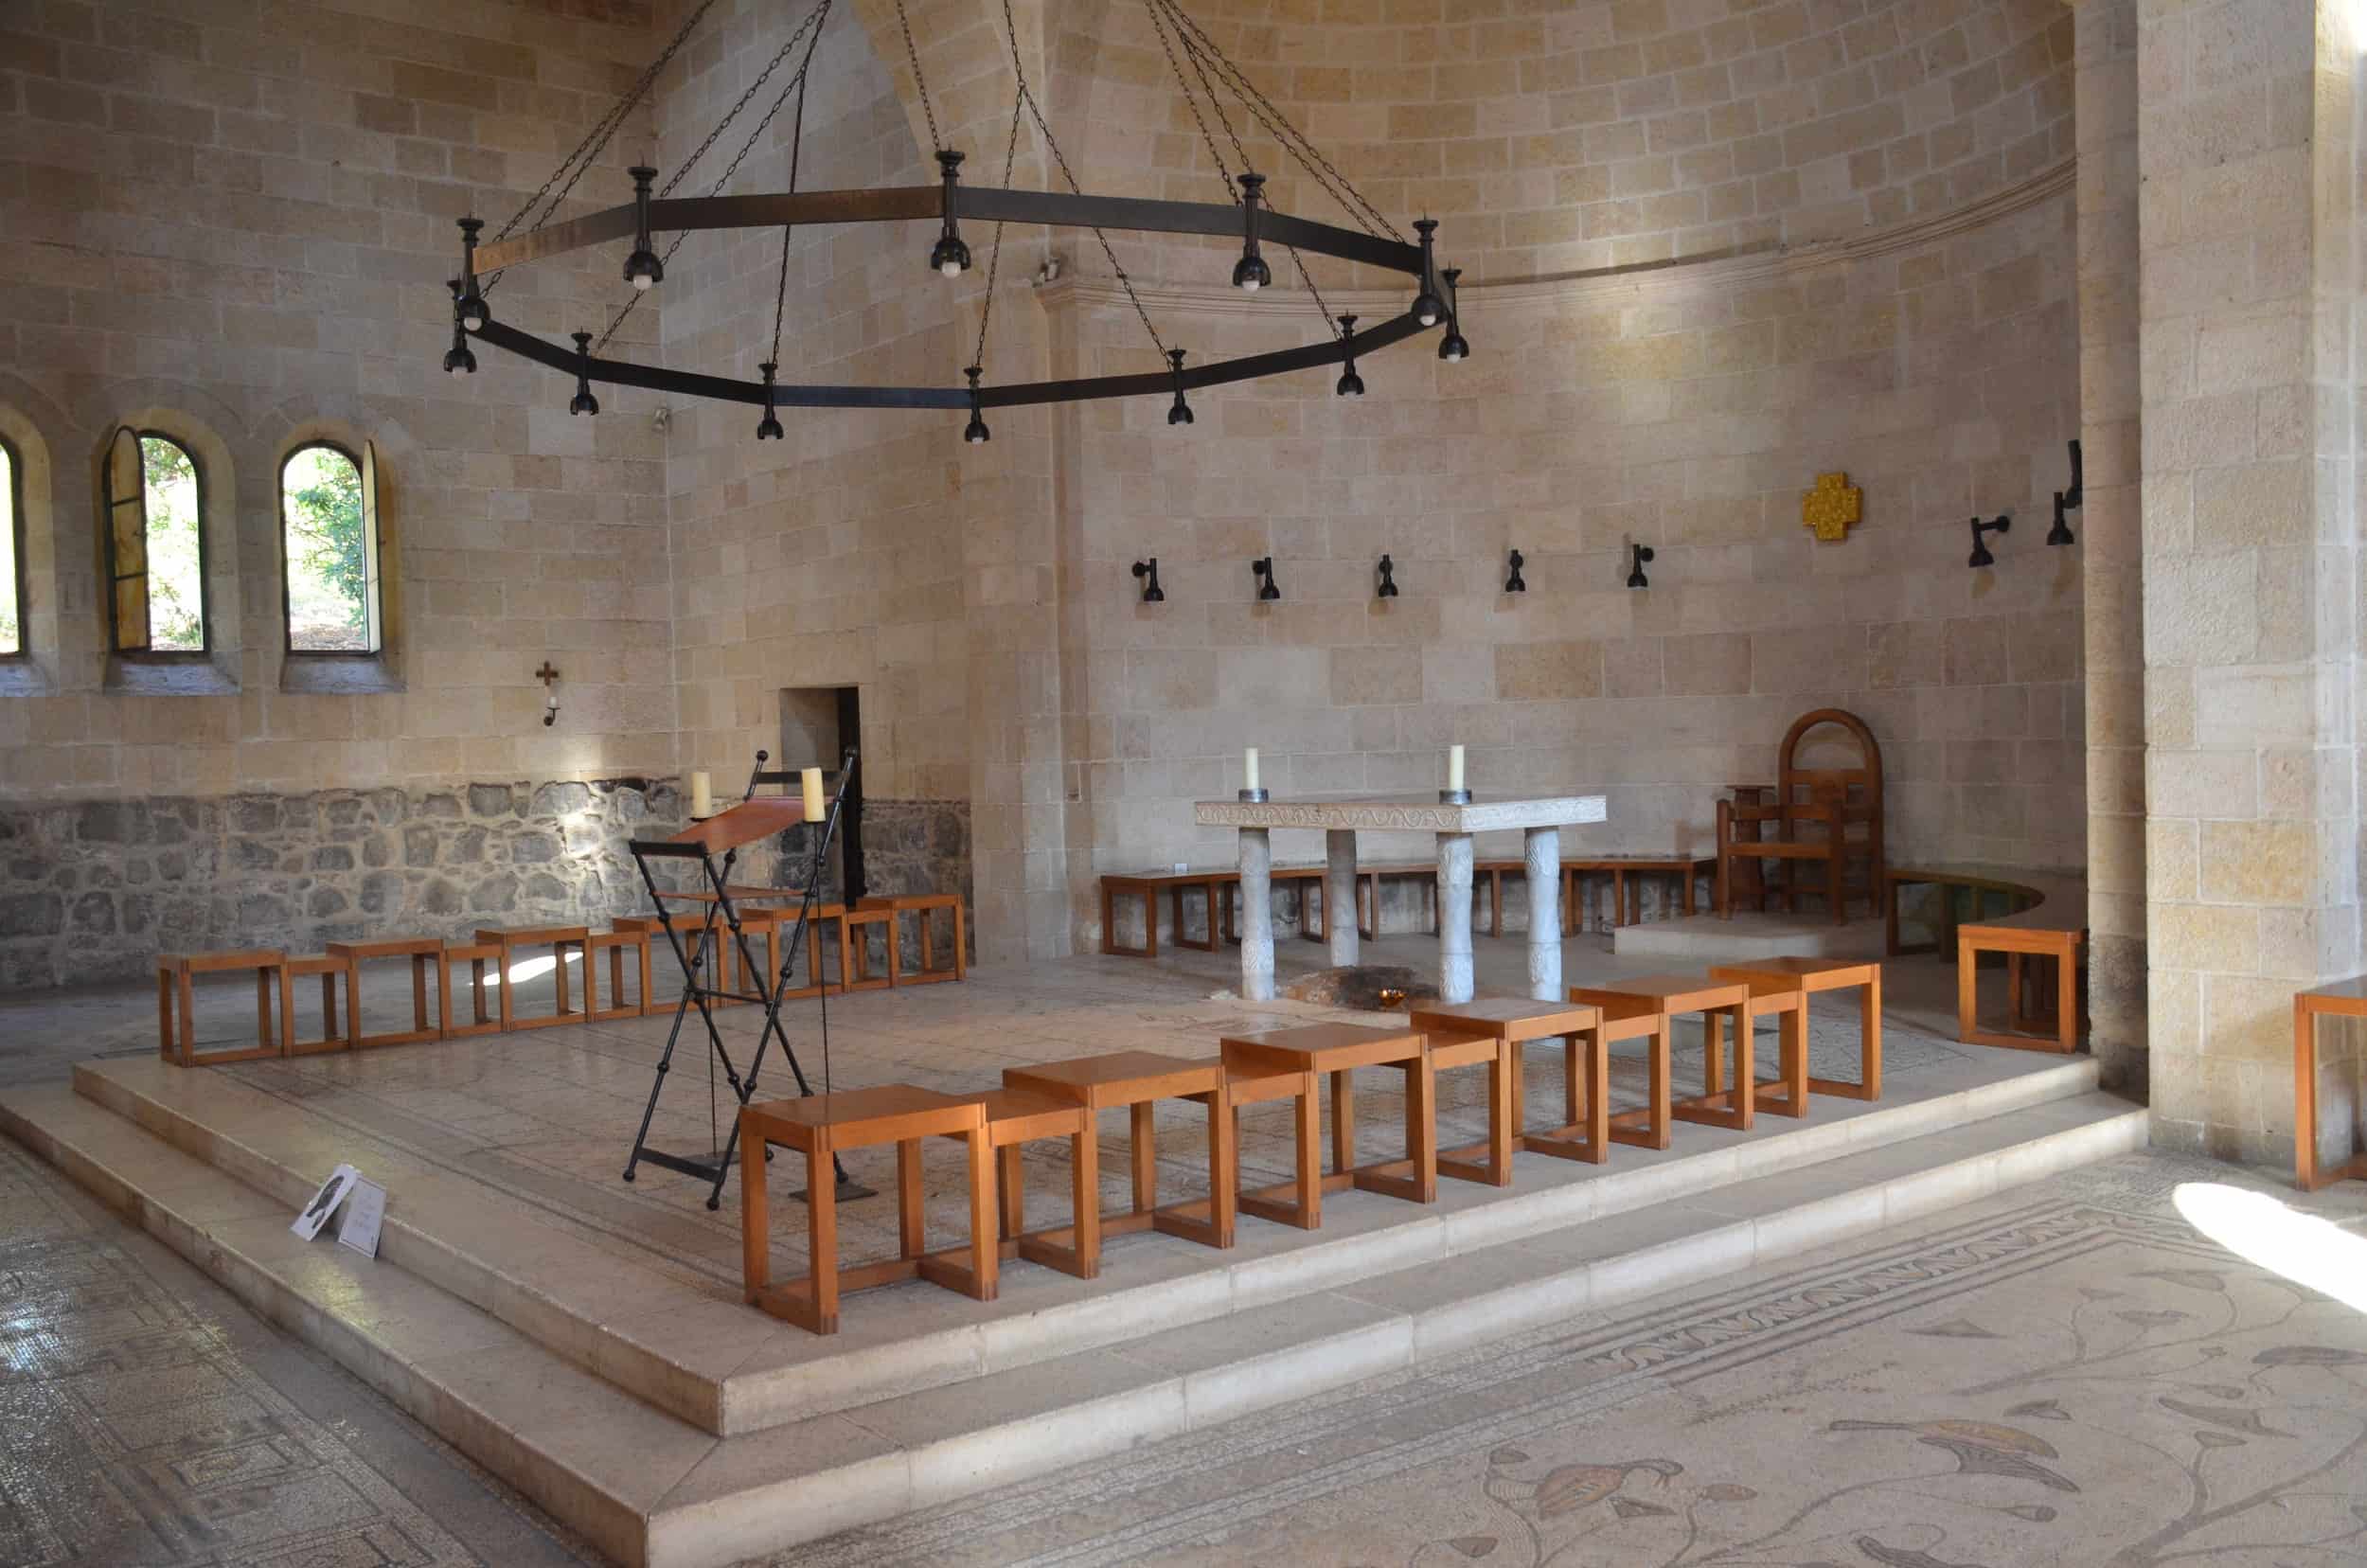 Altar at the Church of the Multiplication in Tabgha, Israel